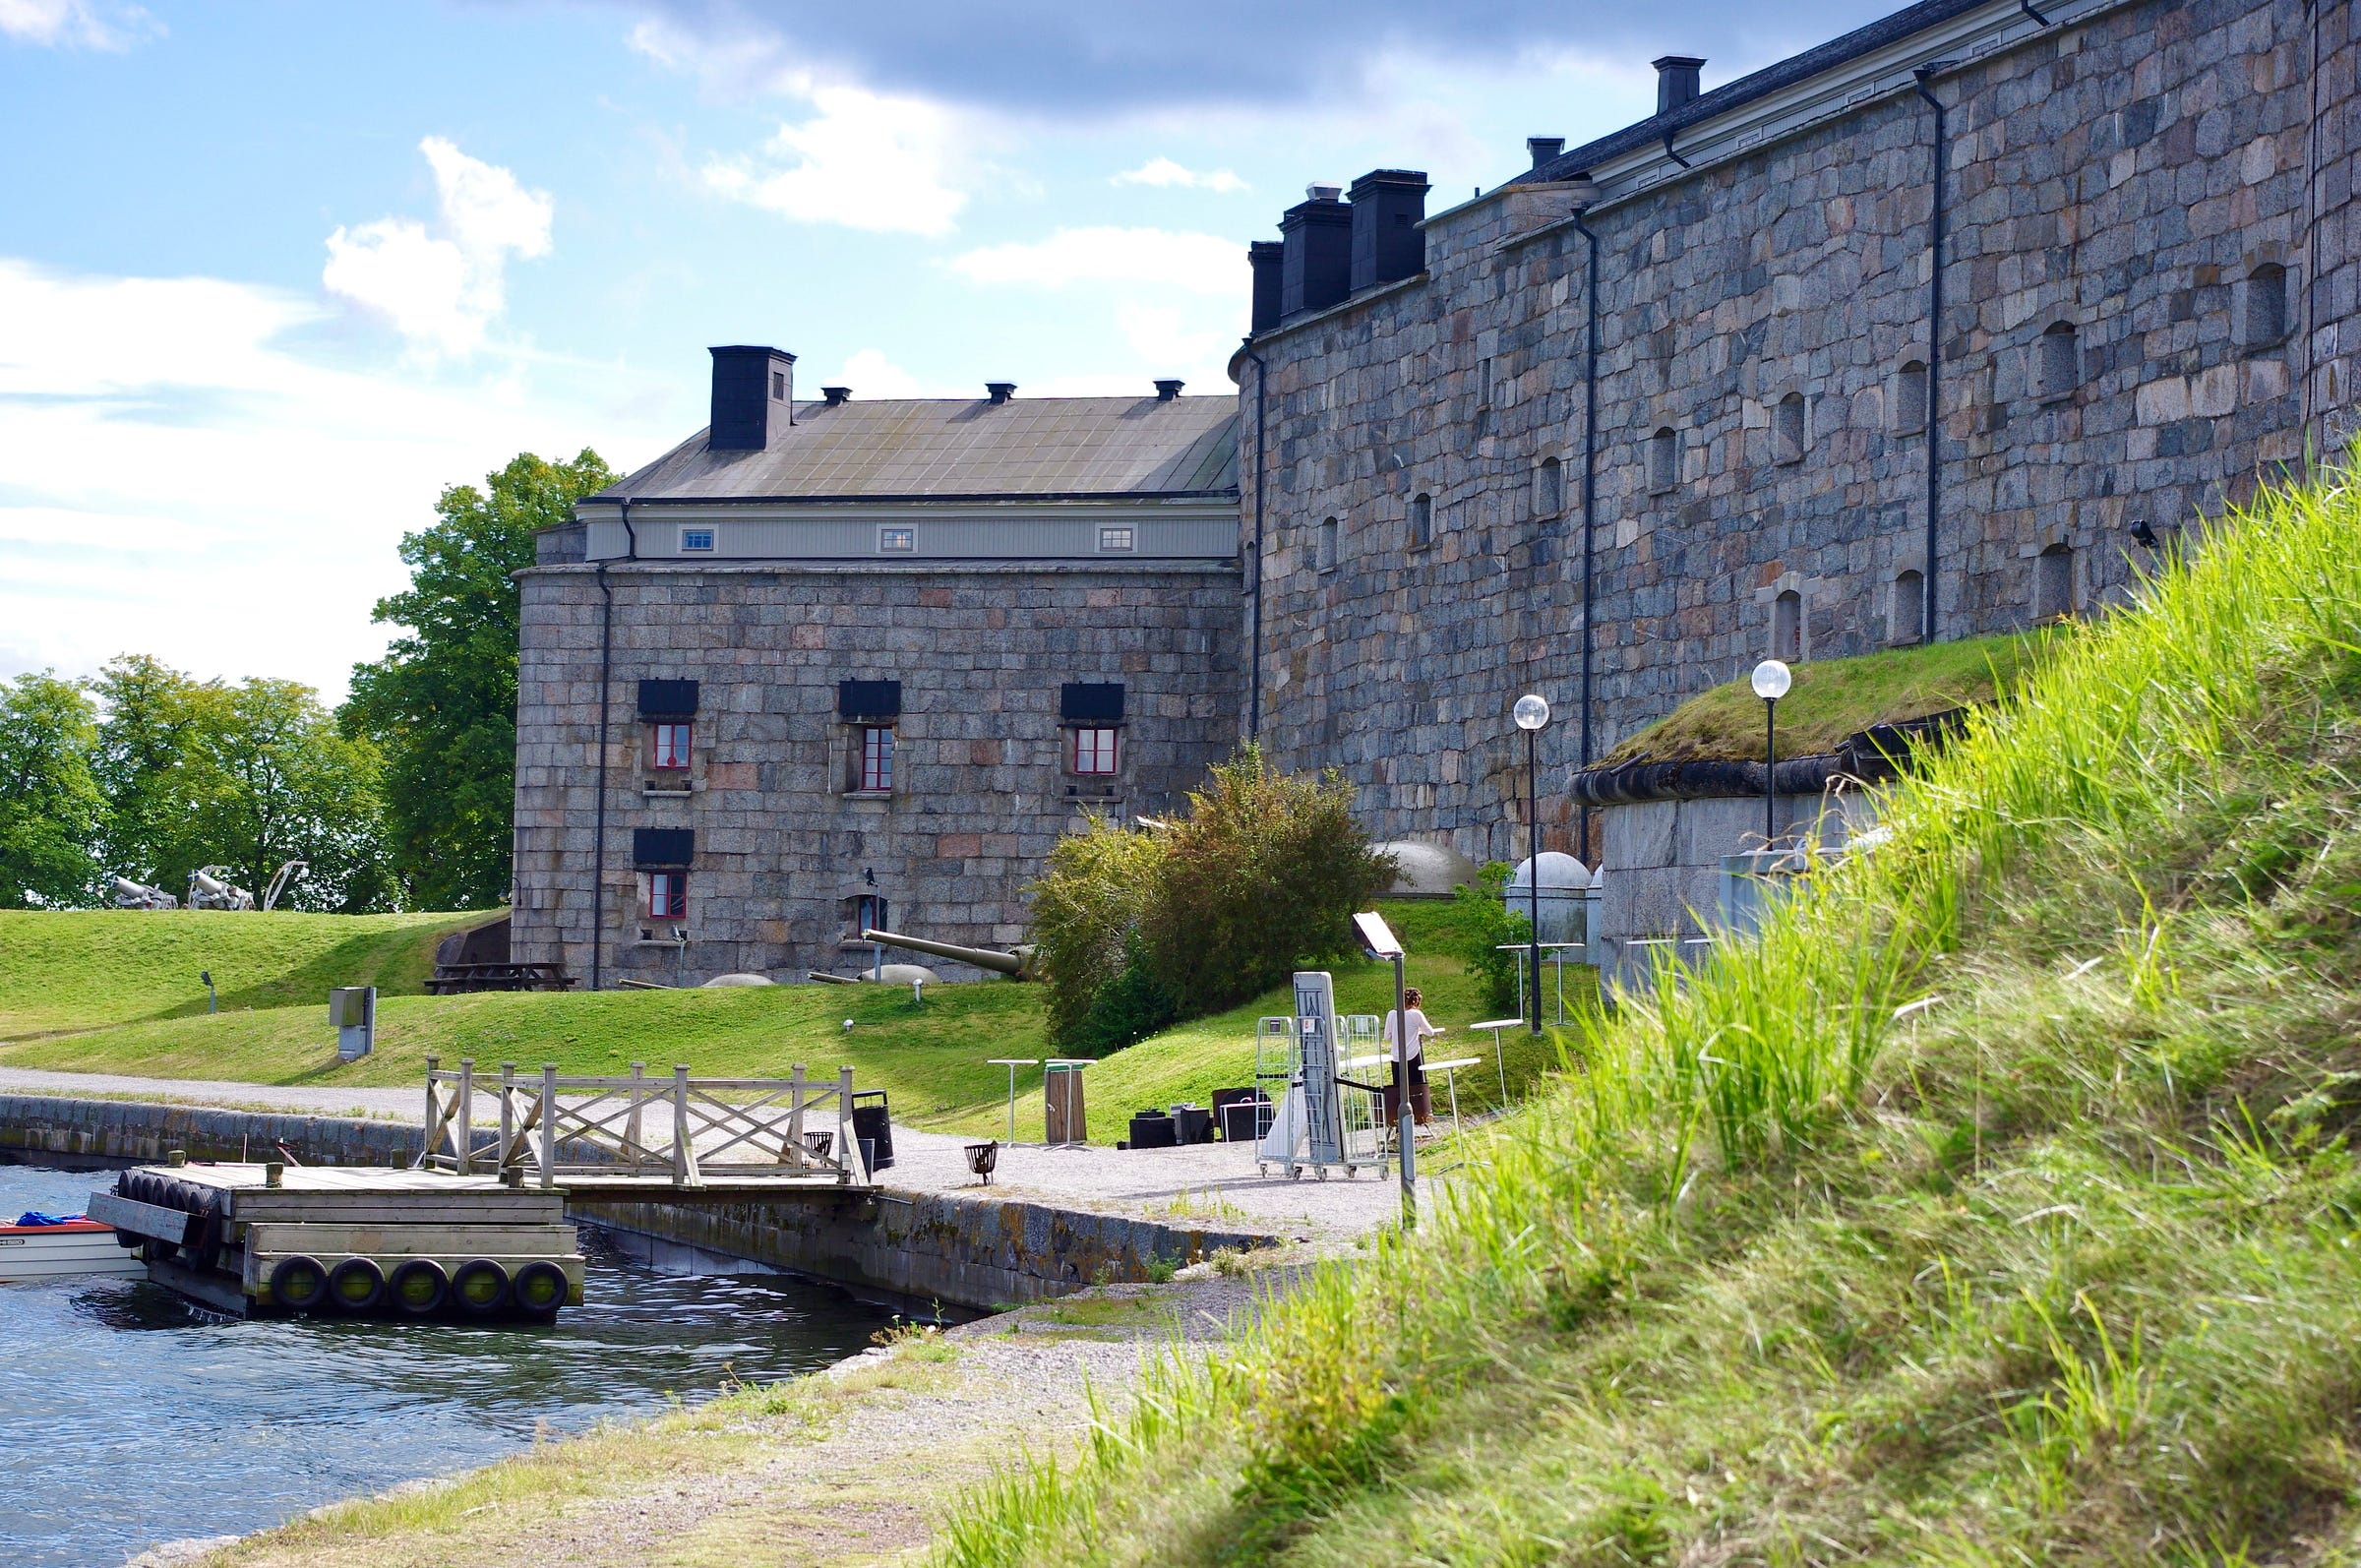 Outdoors at Vaxholm Fortress near where the shed was located. Photo by Anna Scheutz